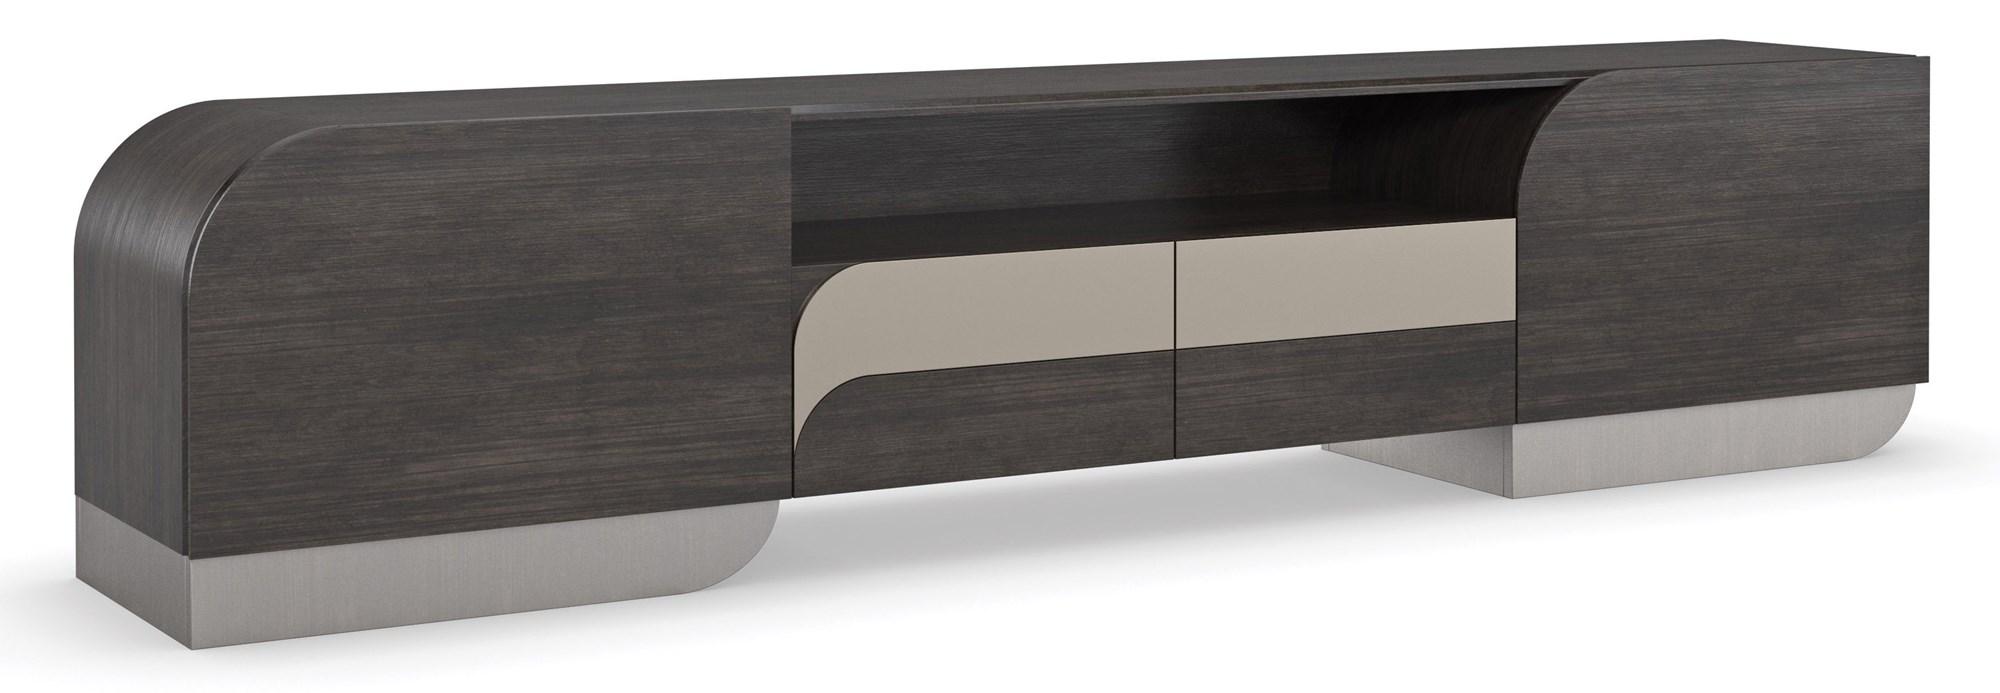 Contemporary Console Table KEEP ME POSTED M131-421-531 in Sepia 